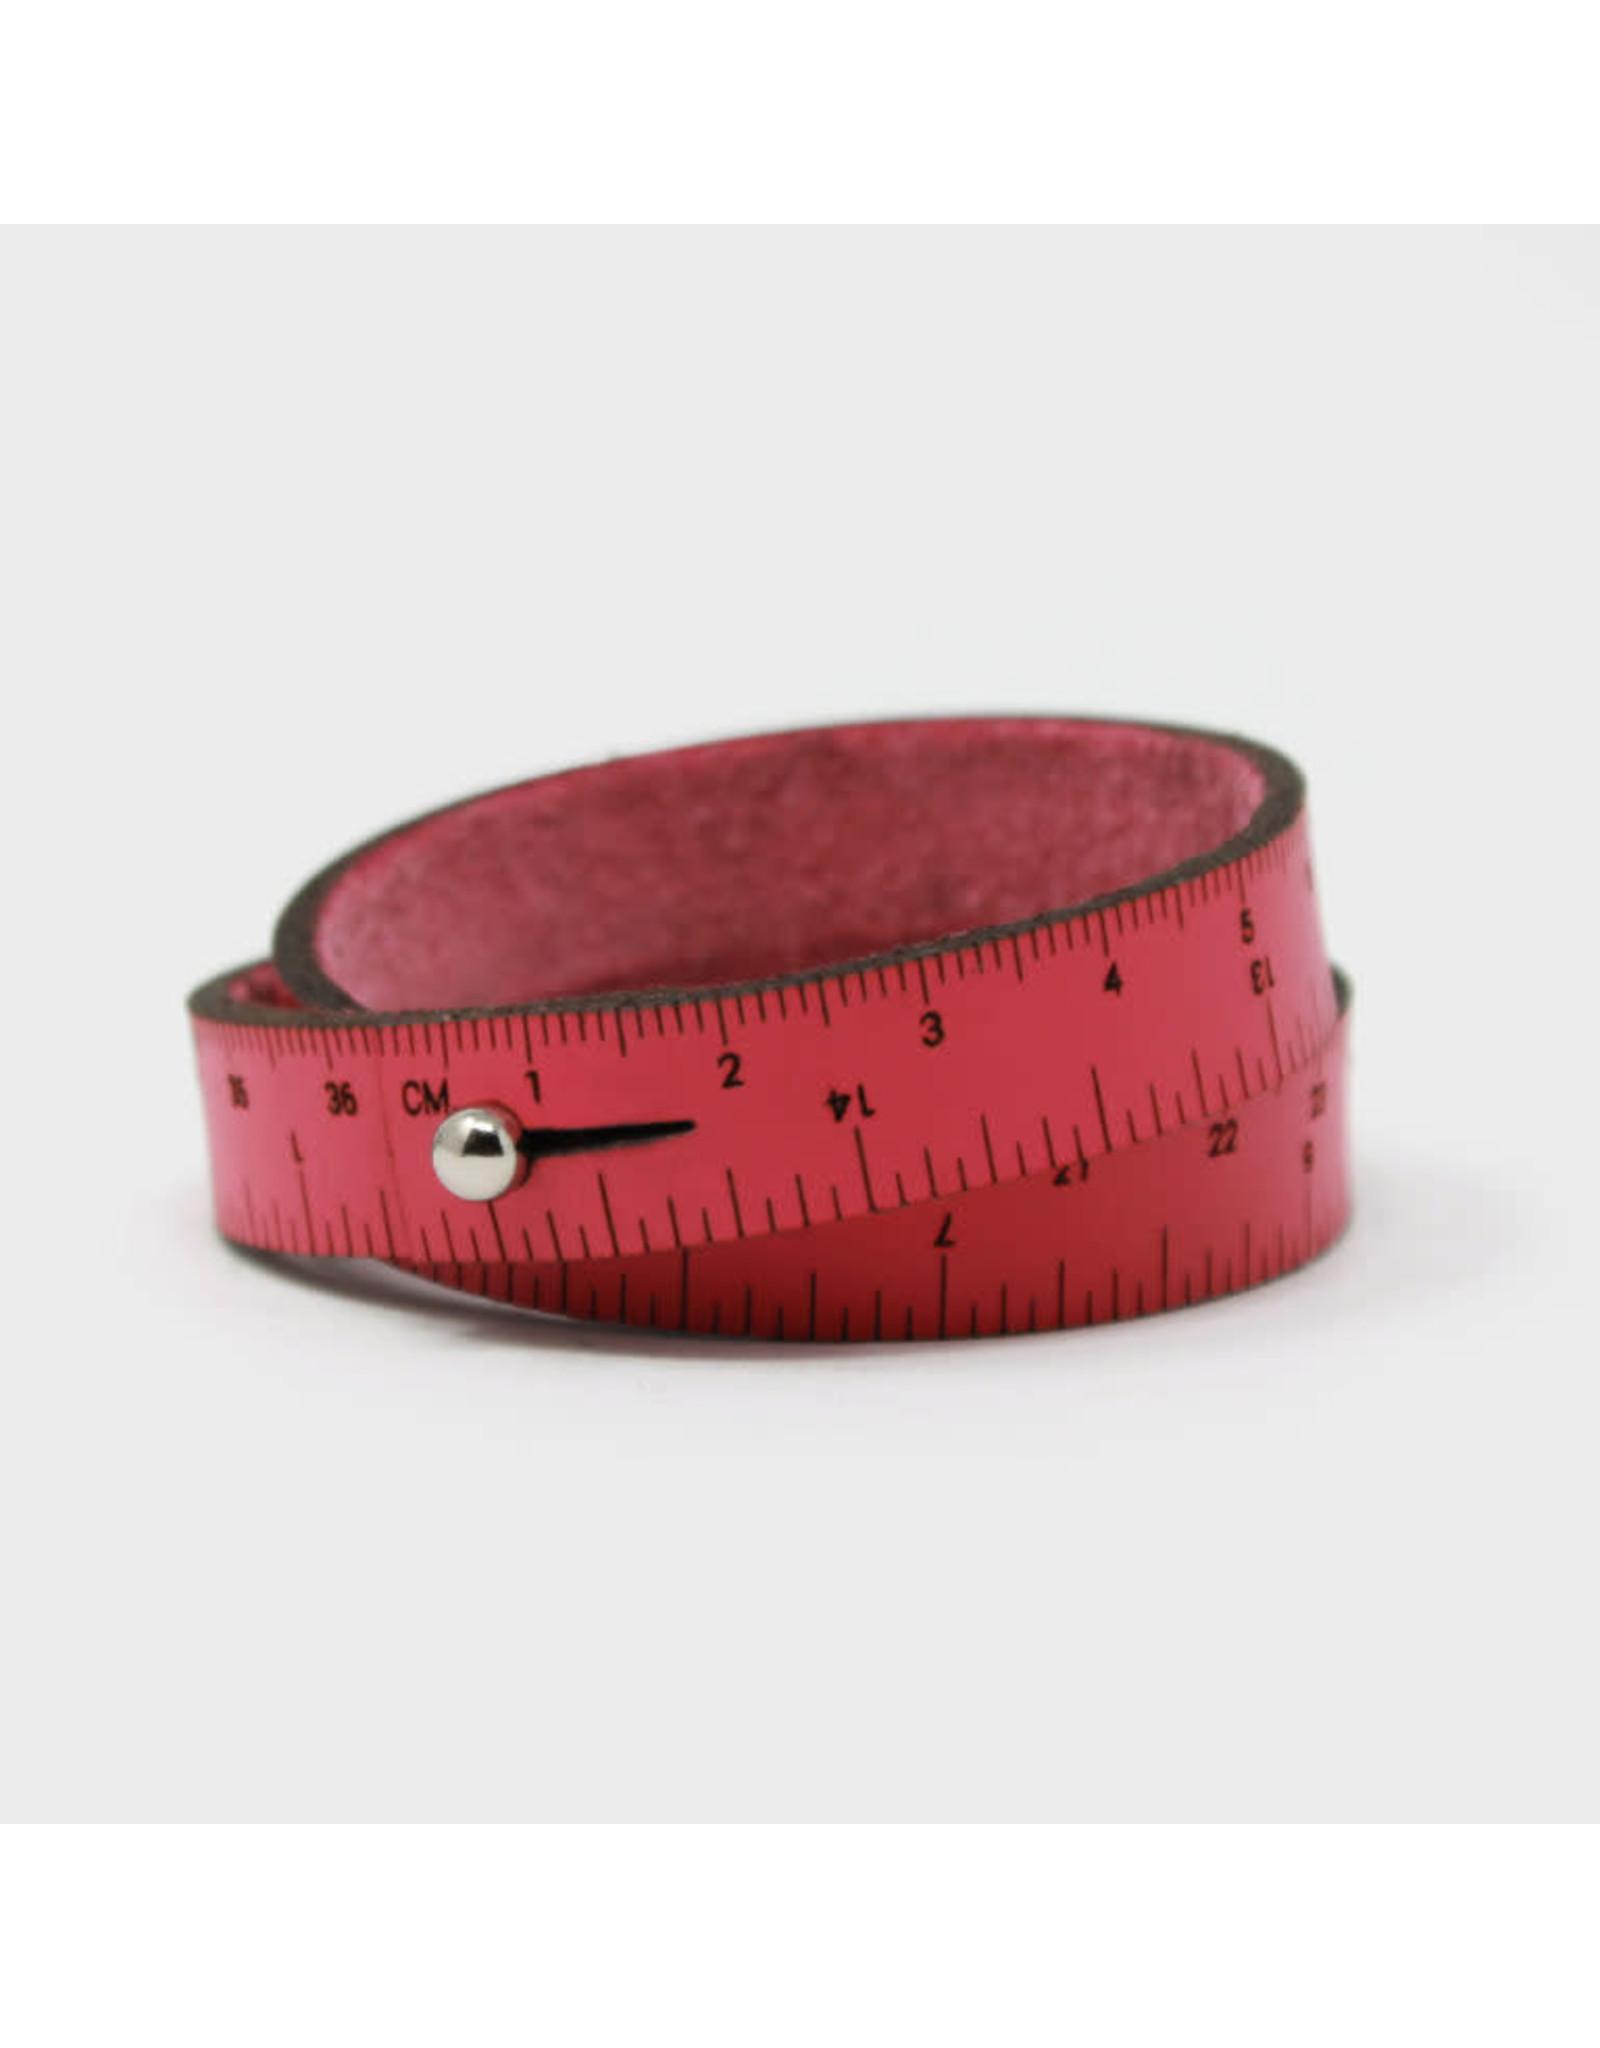 Wrist Ruler - HOT PINK - 17 inches